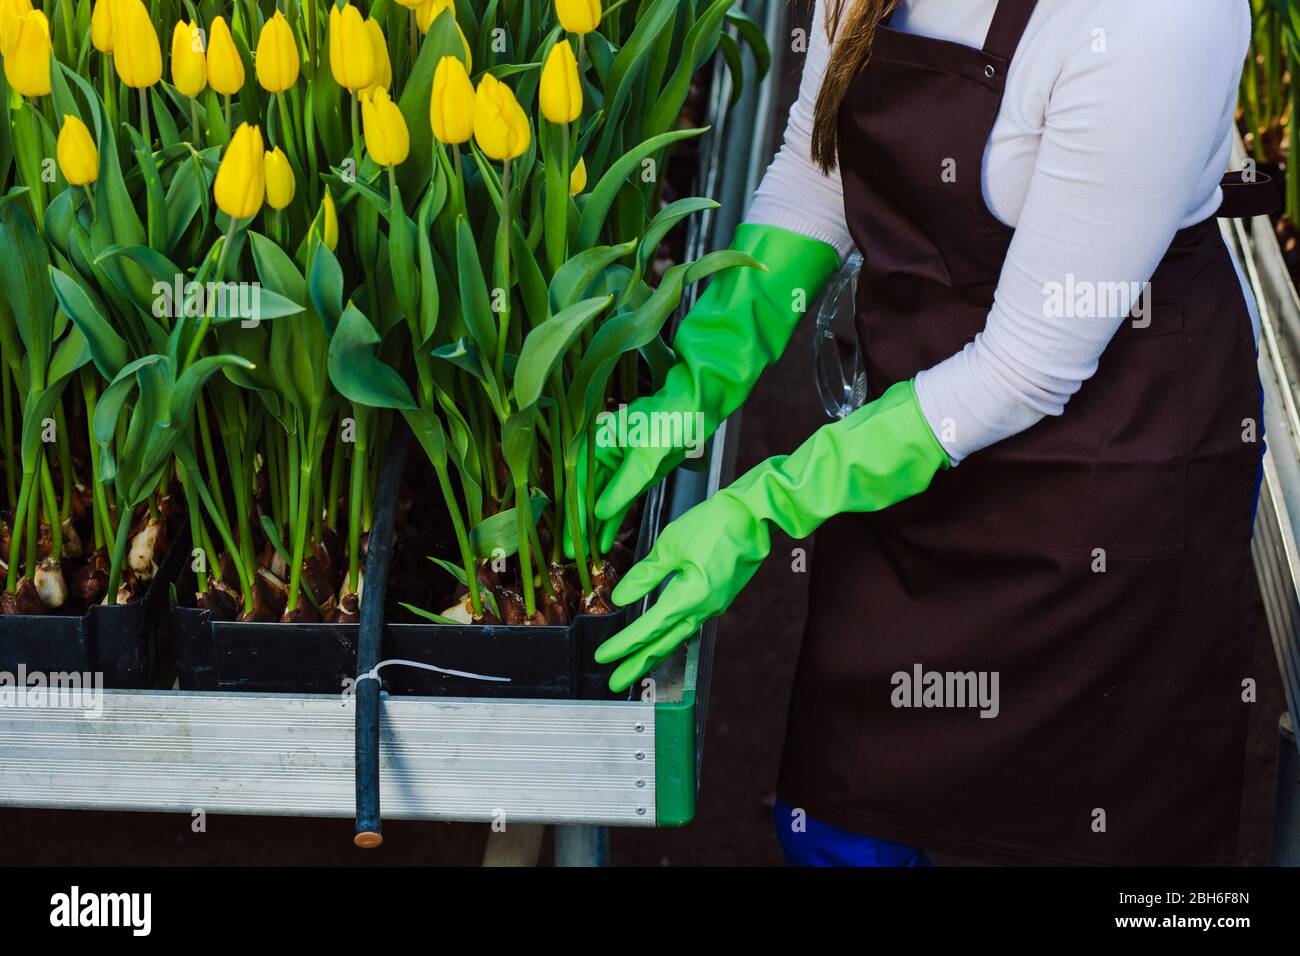 gardener takes care of tulips, close-up of hands, wearing gloves.Tulip Hydroponically, in greenhouse, Industrial cultivation of flowers Stock Photo